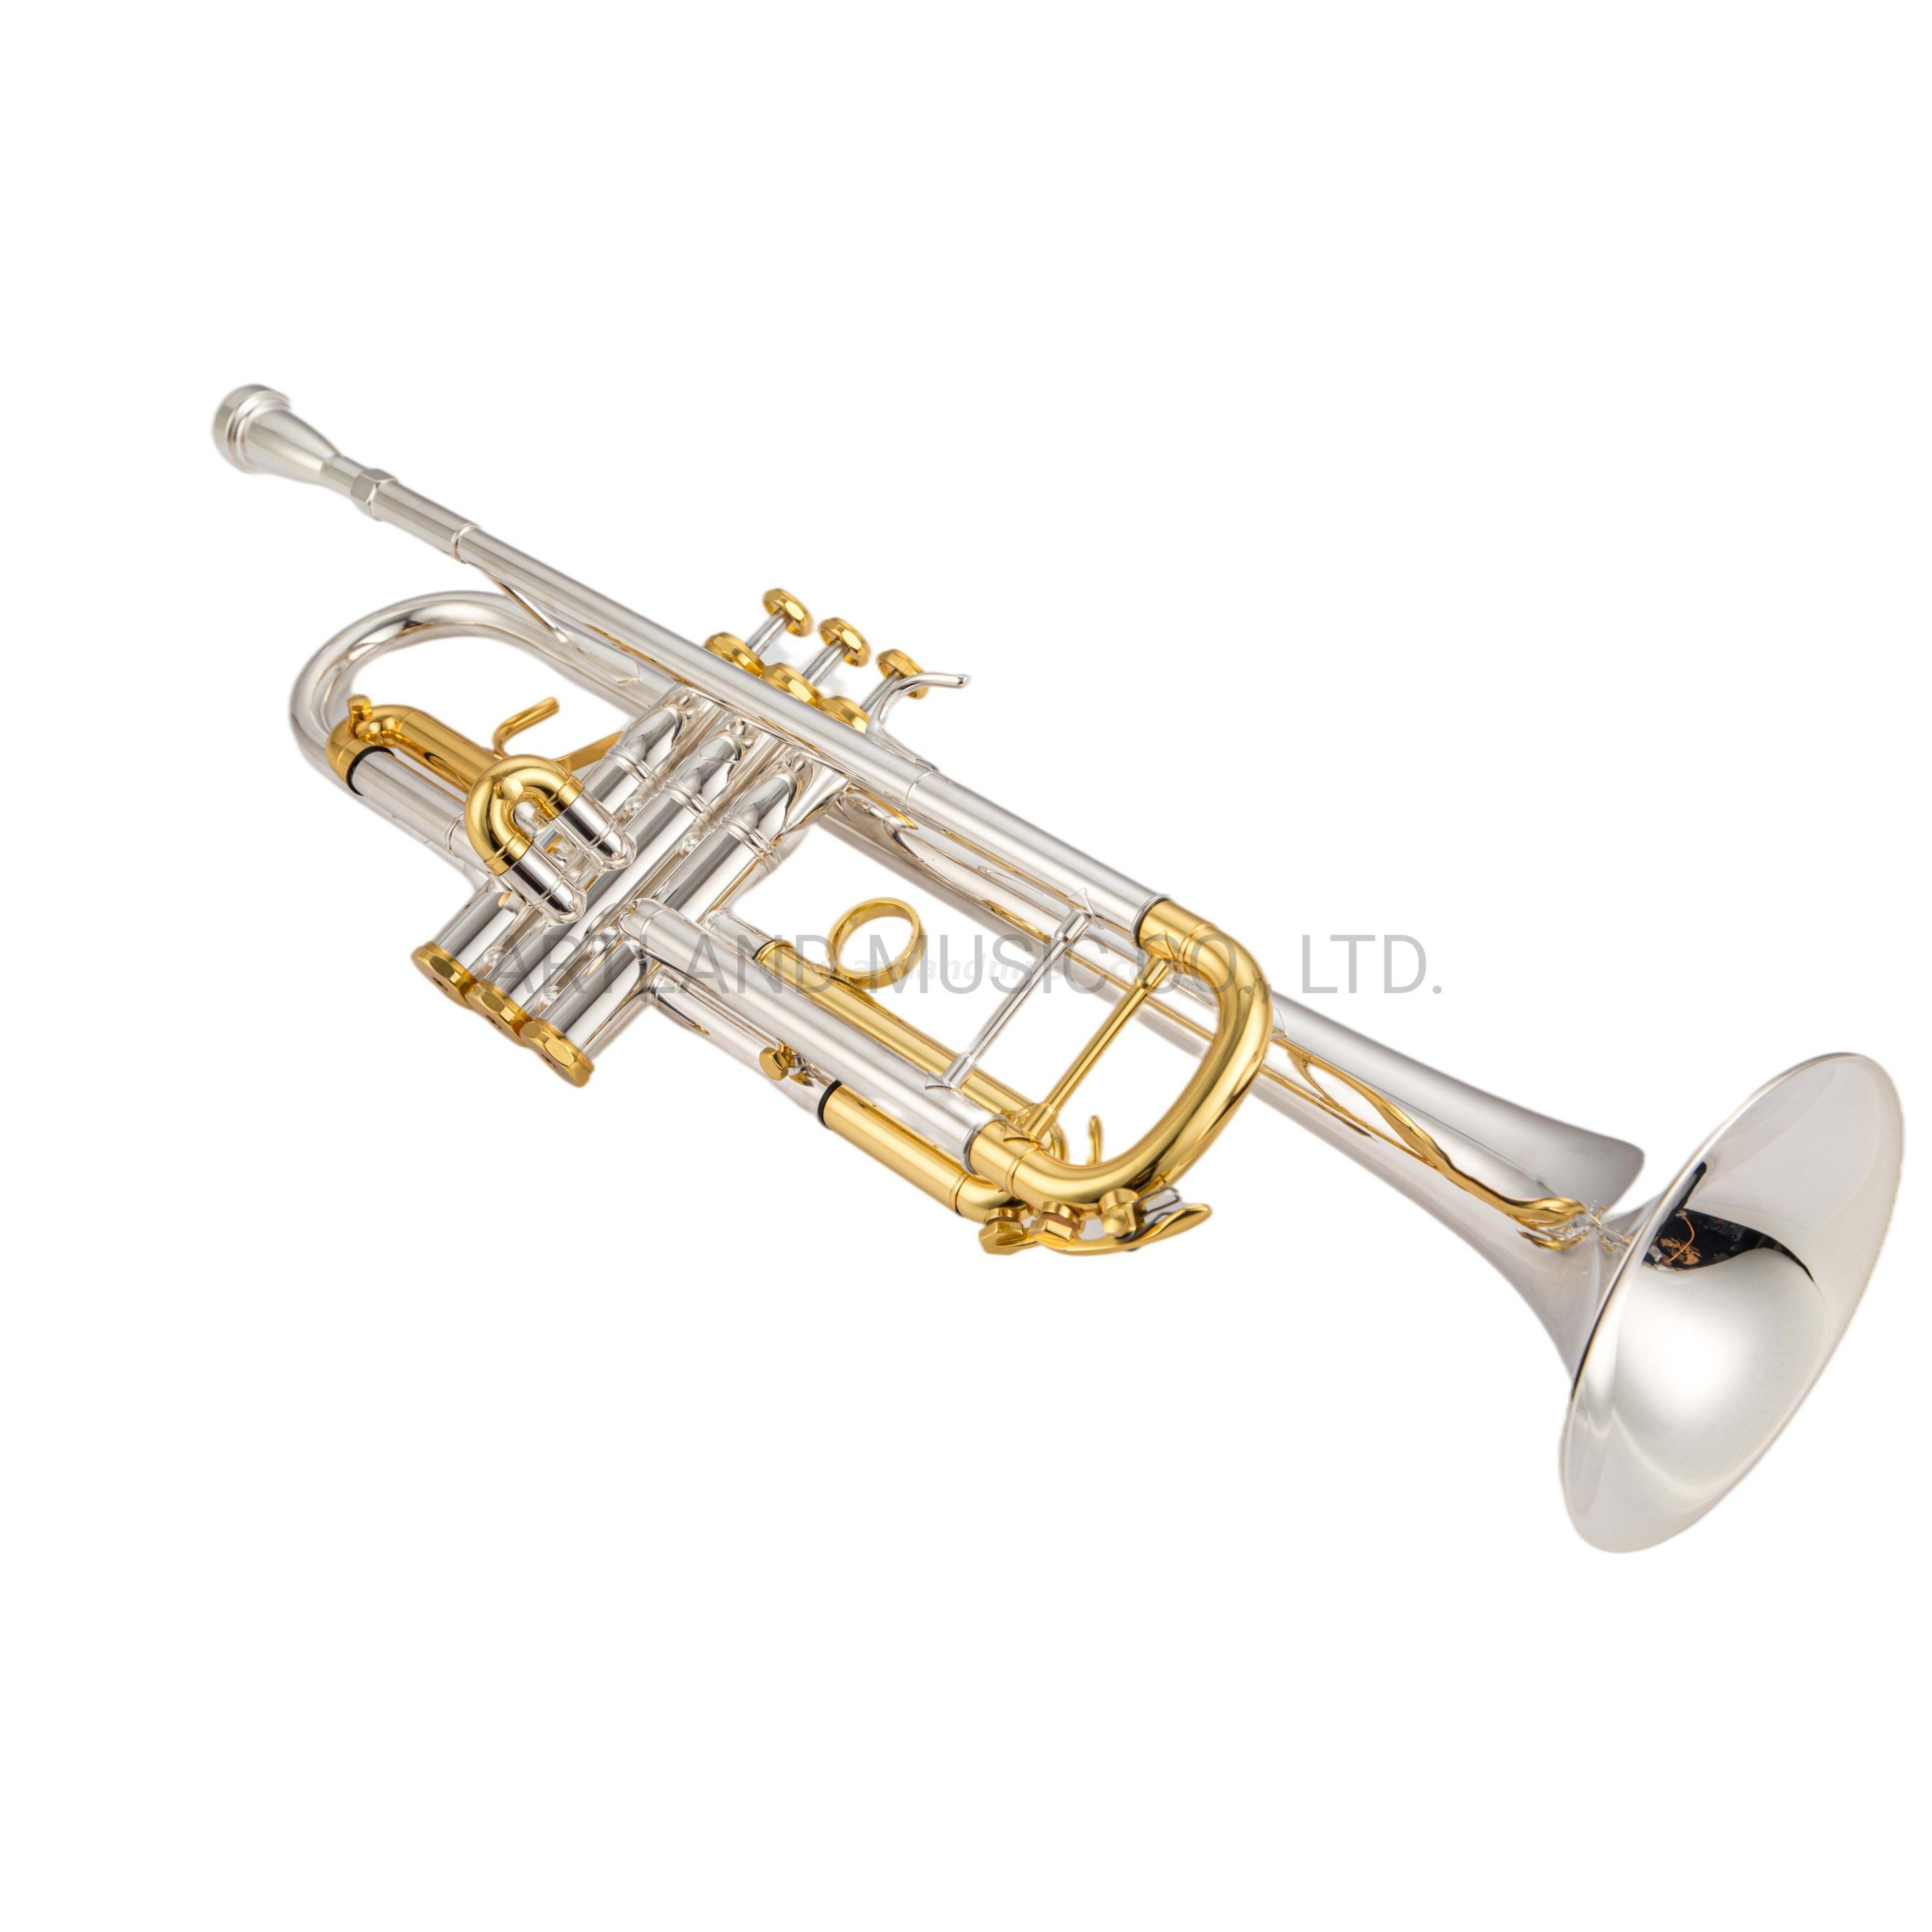 Bach Style Trumpet Silver with Gold plated Cap, One 3c And 5c Mouthpiece (ATR0275S)